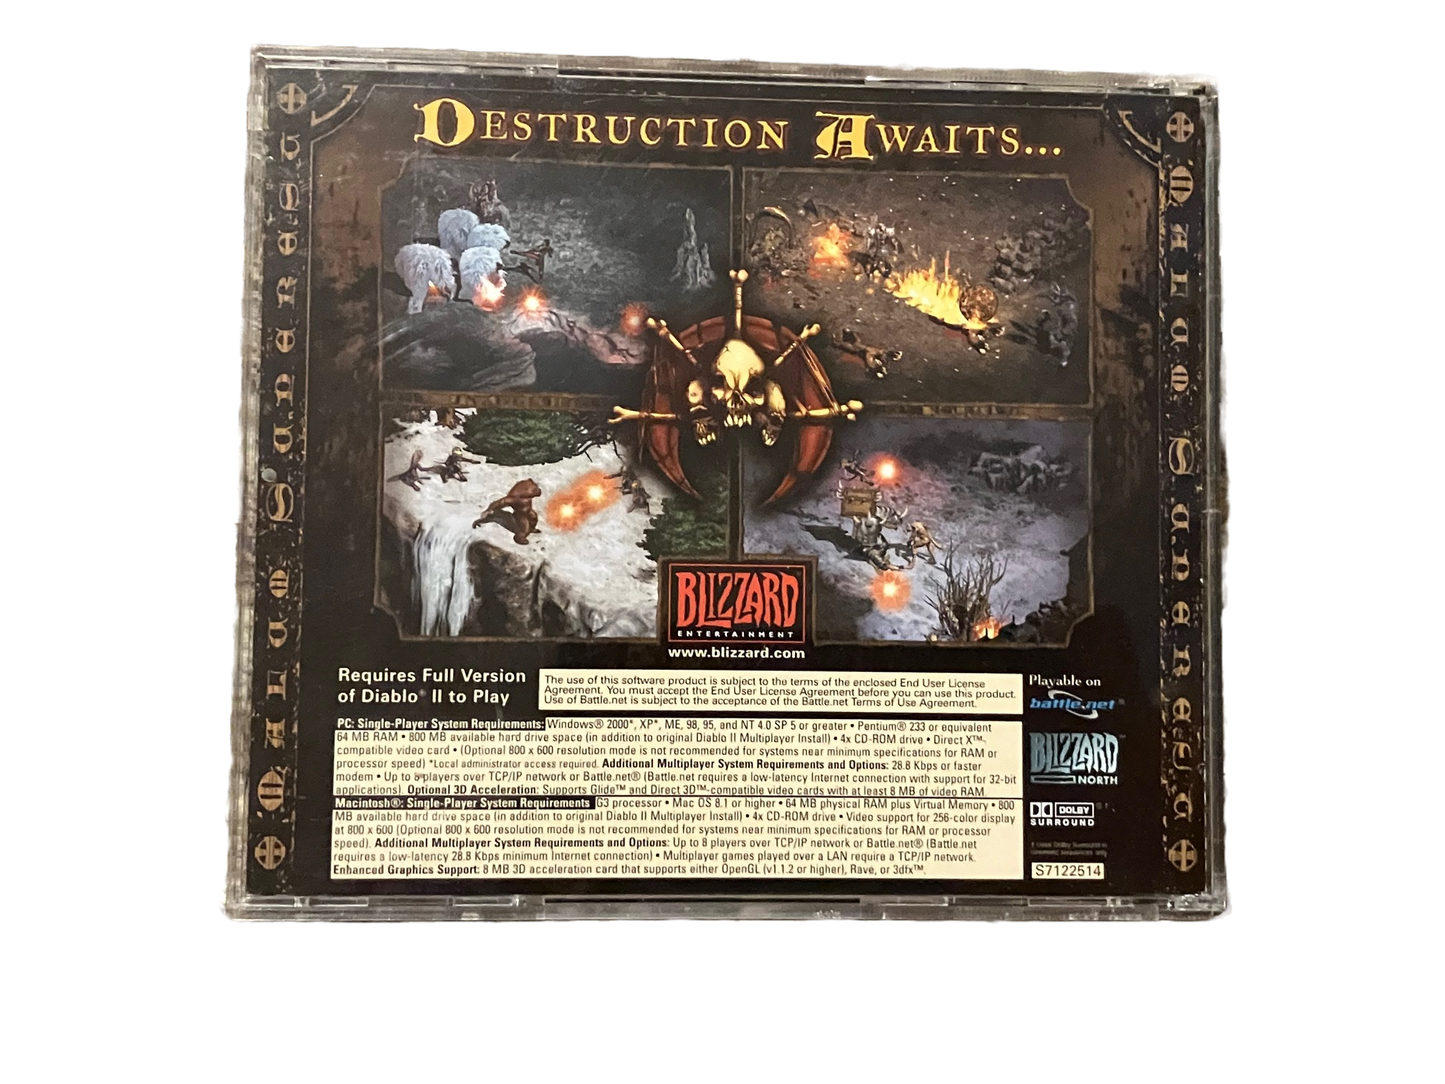 Diablo II Expansion Set: Lord of Destruction PC CD Rom Game.